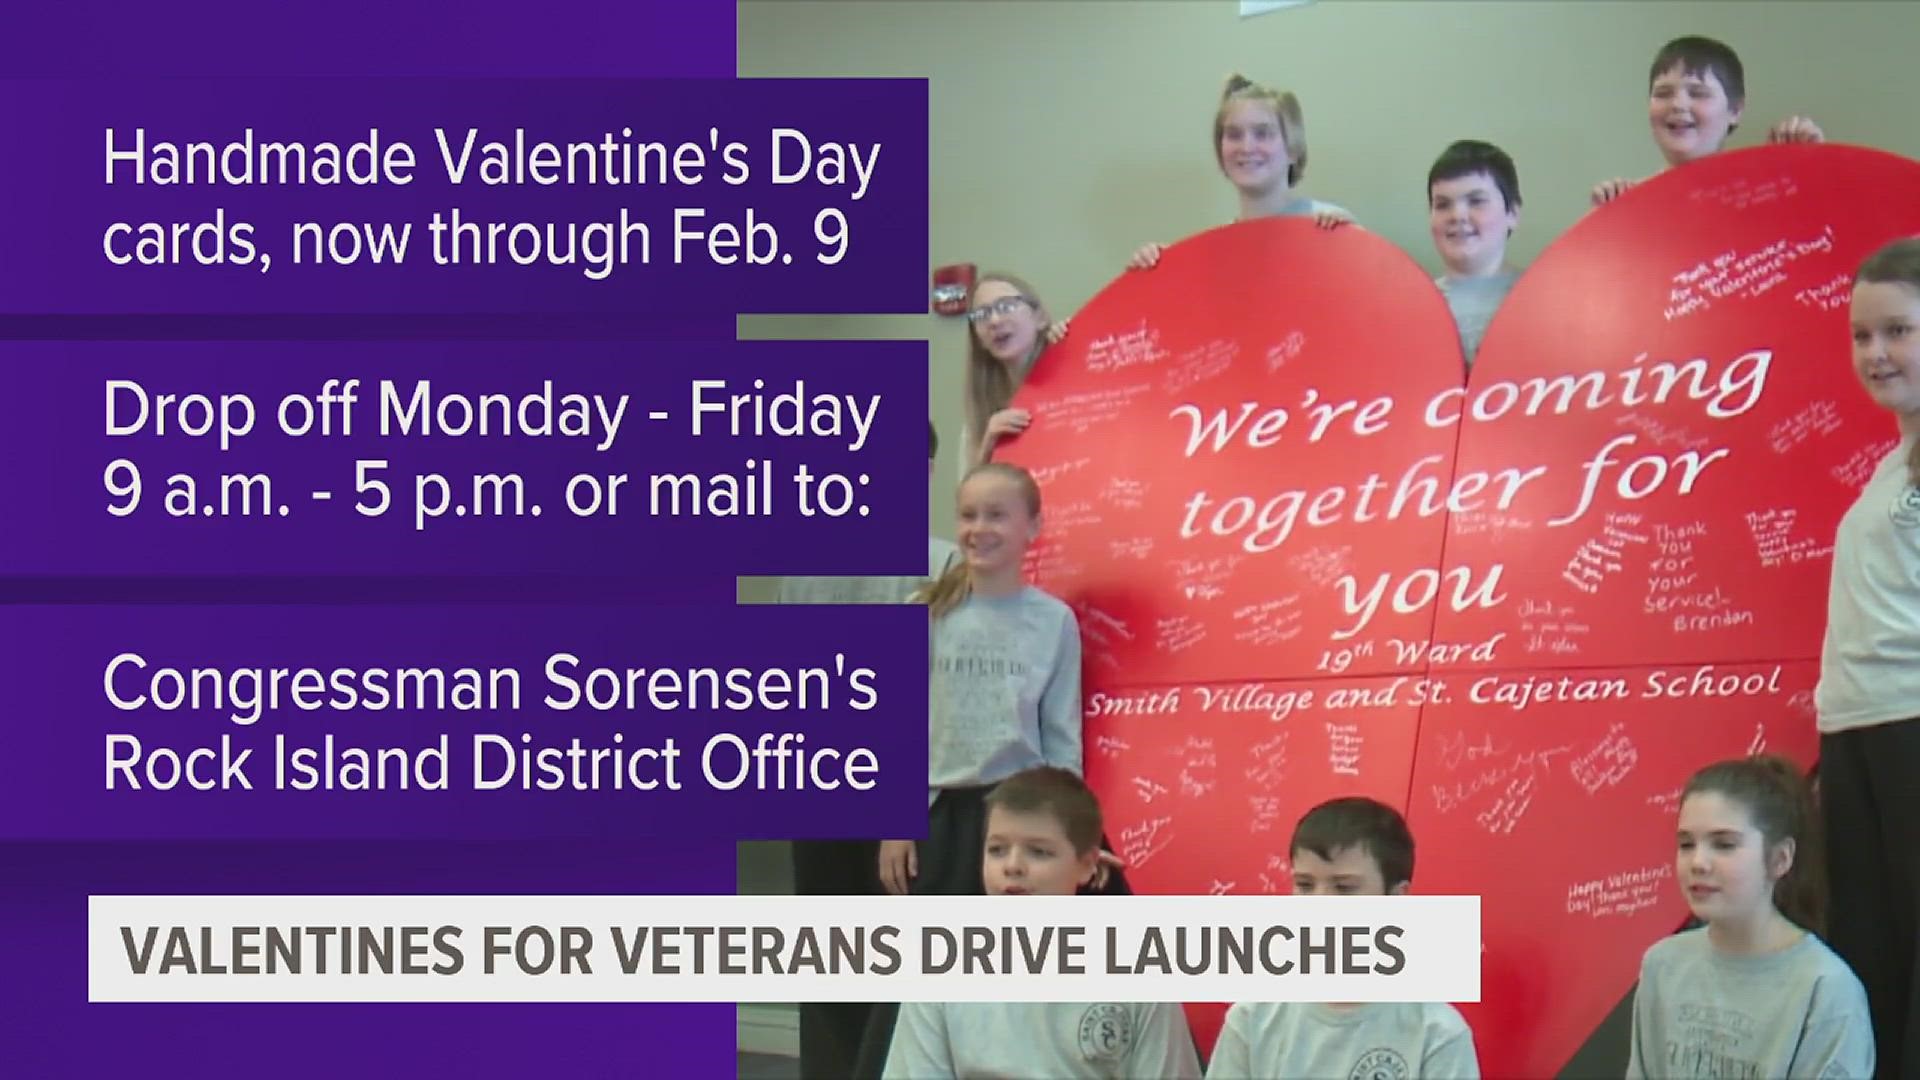 The Illinois QC's major representatives are asking Quad Citizens to send Valentine's Day cards for seniors in long-term facilities and veterans to their offices.